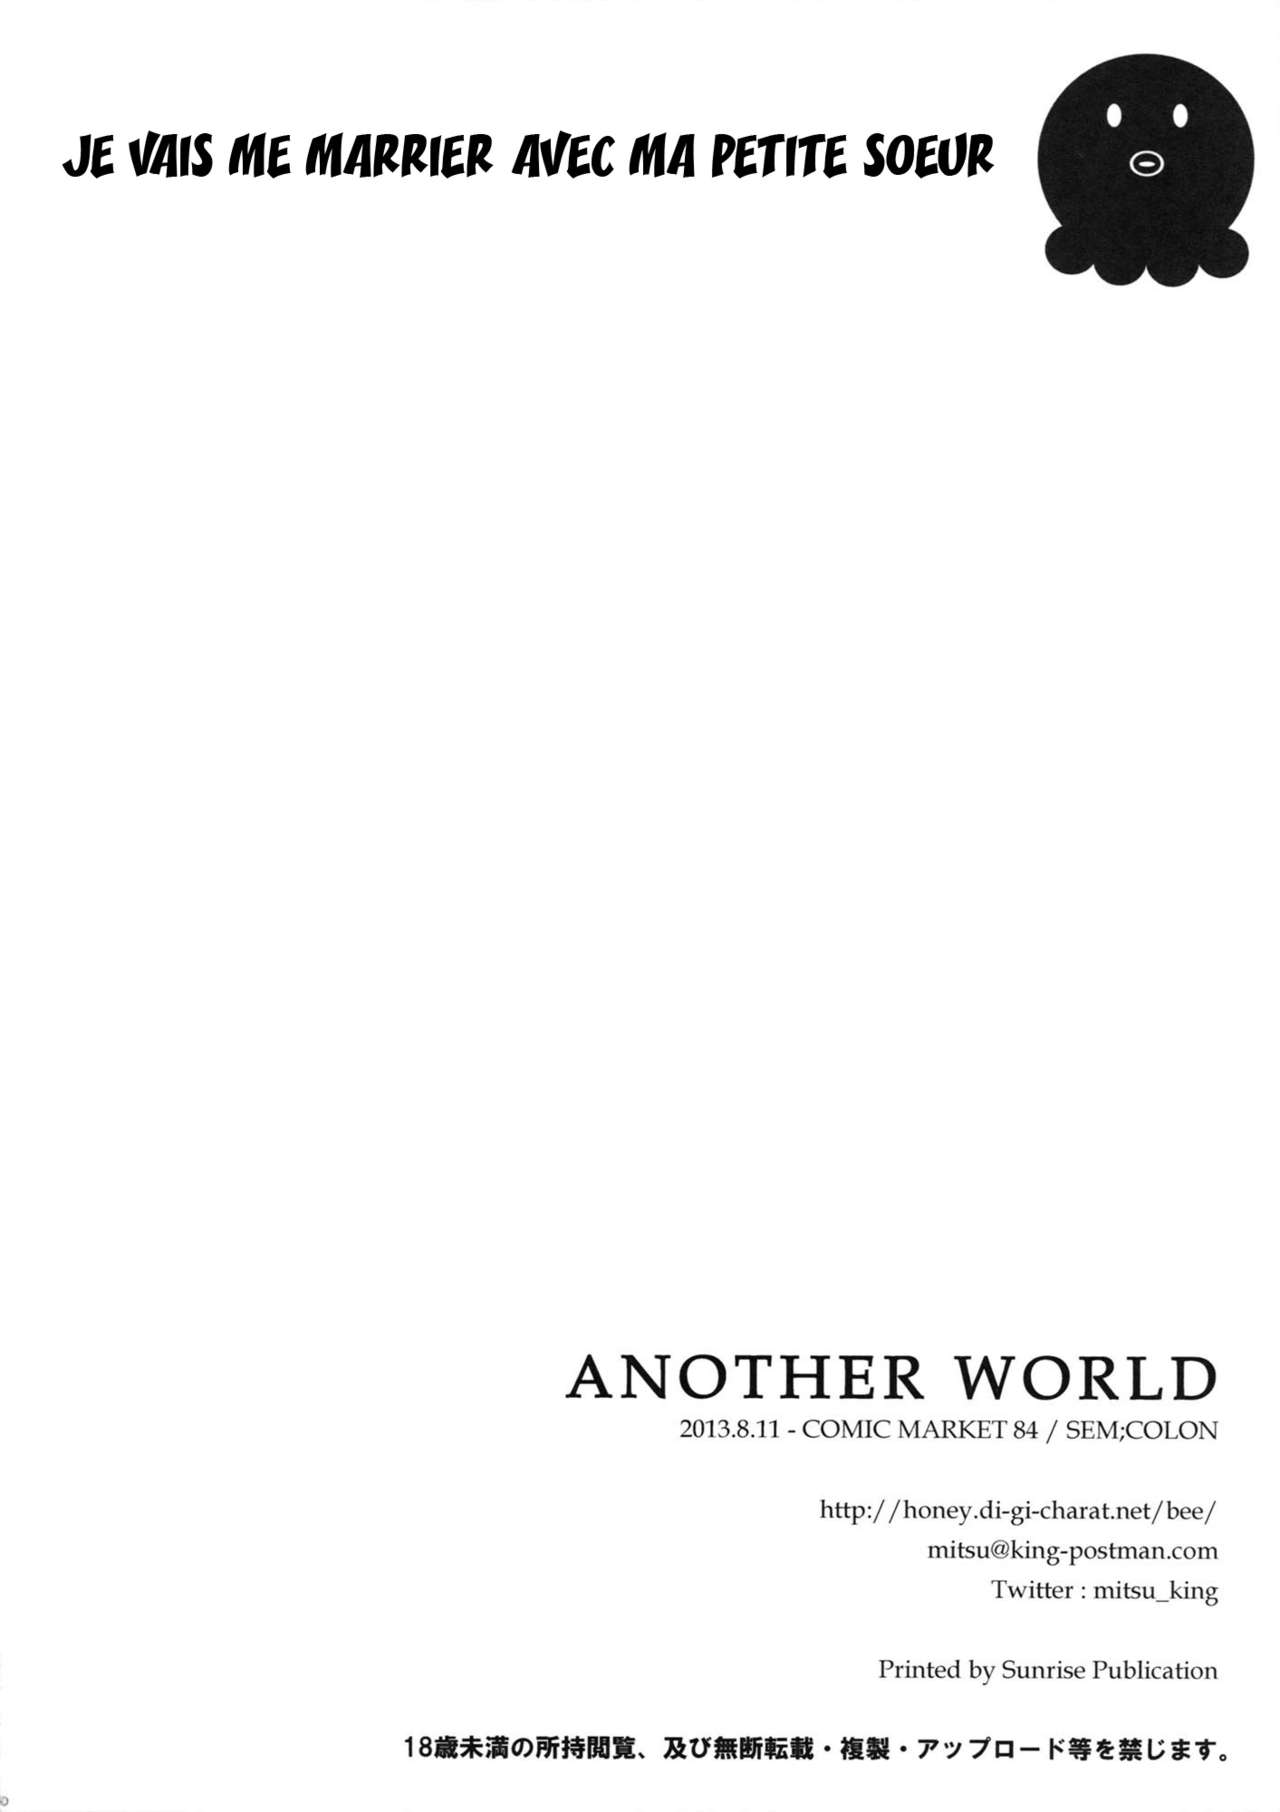 ANOTHER WORLD numero d'image 48